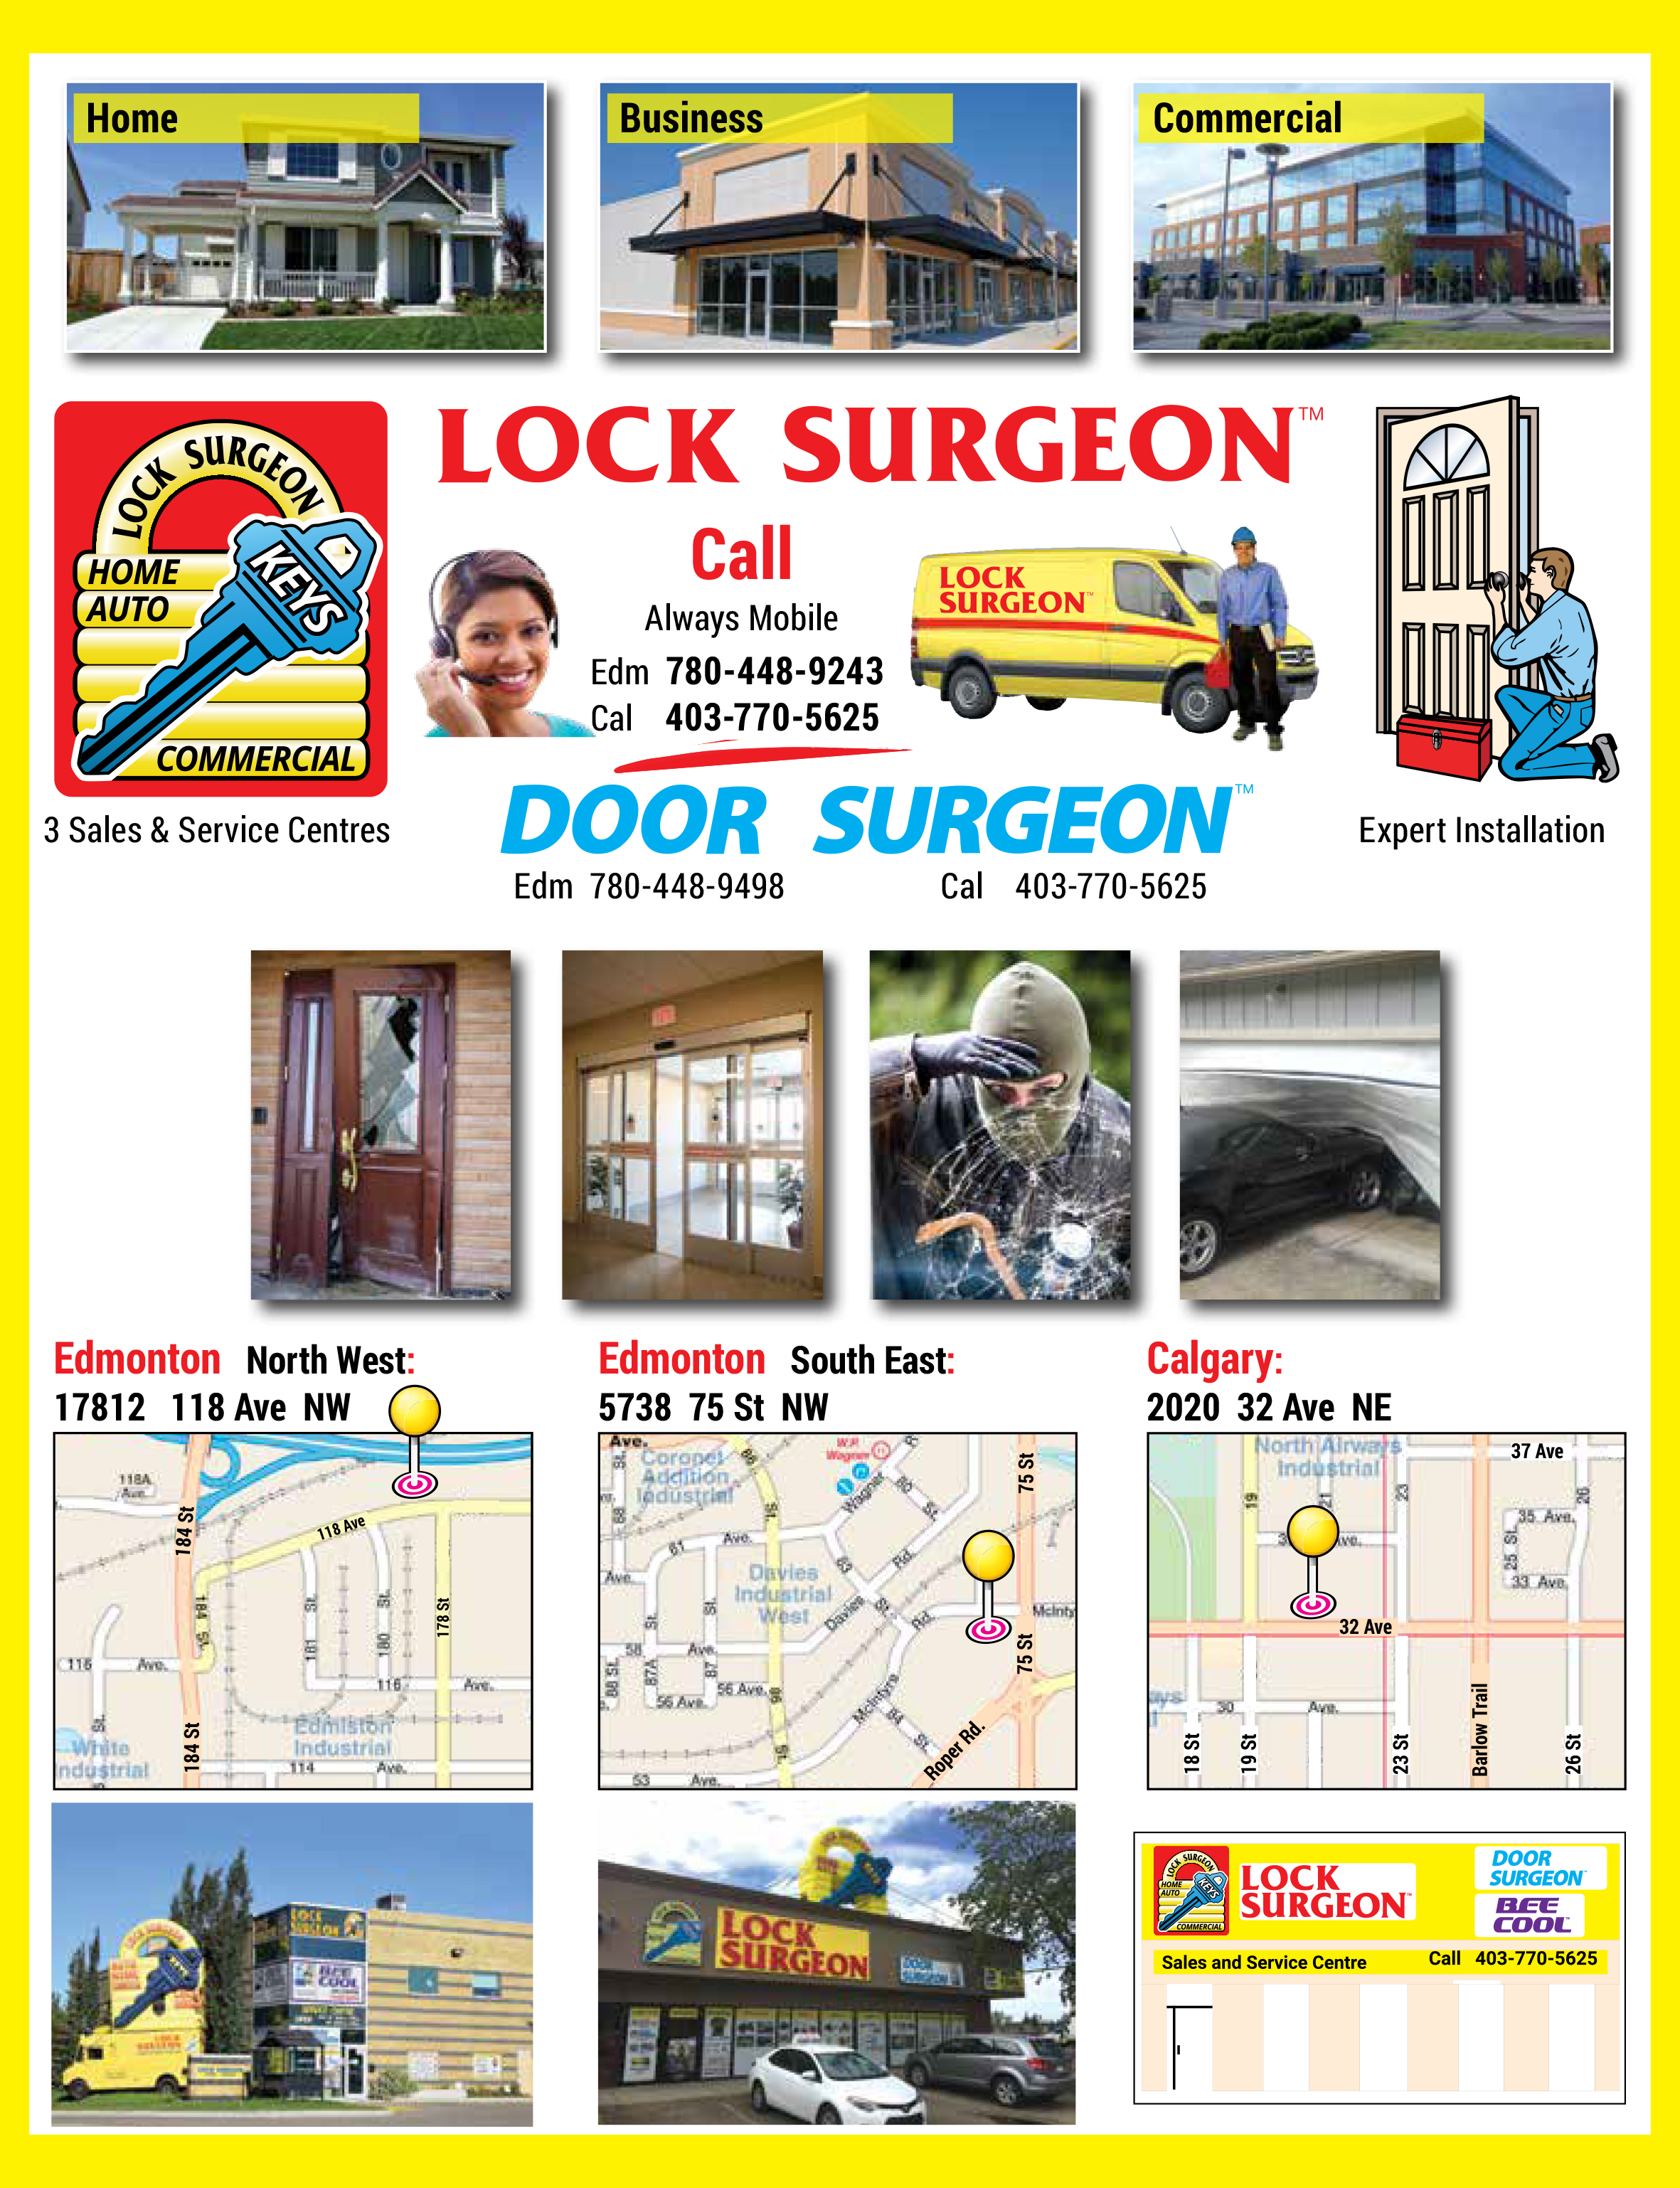 Door Surgeon provides in-store sales and service as well as mobile door service and installation.